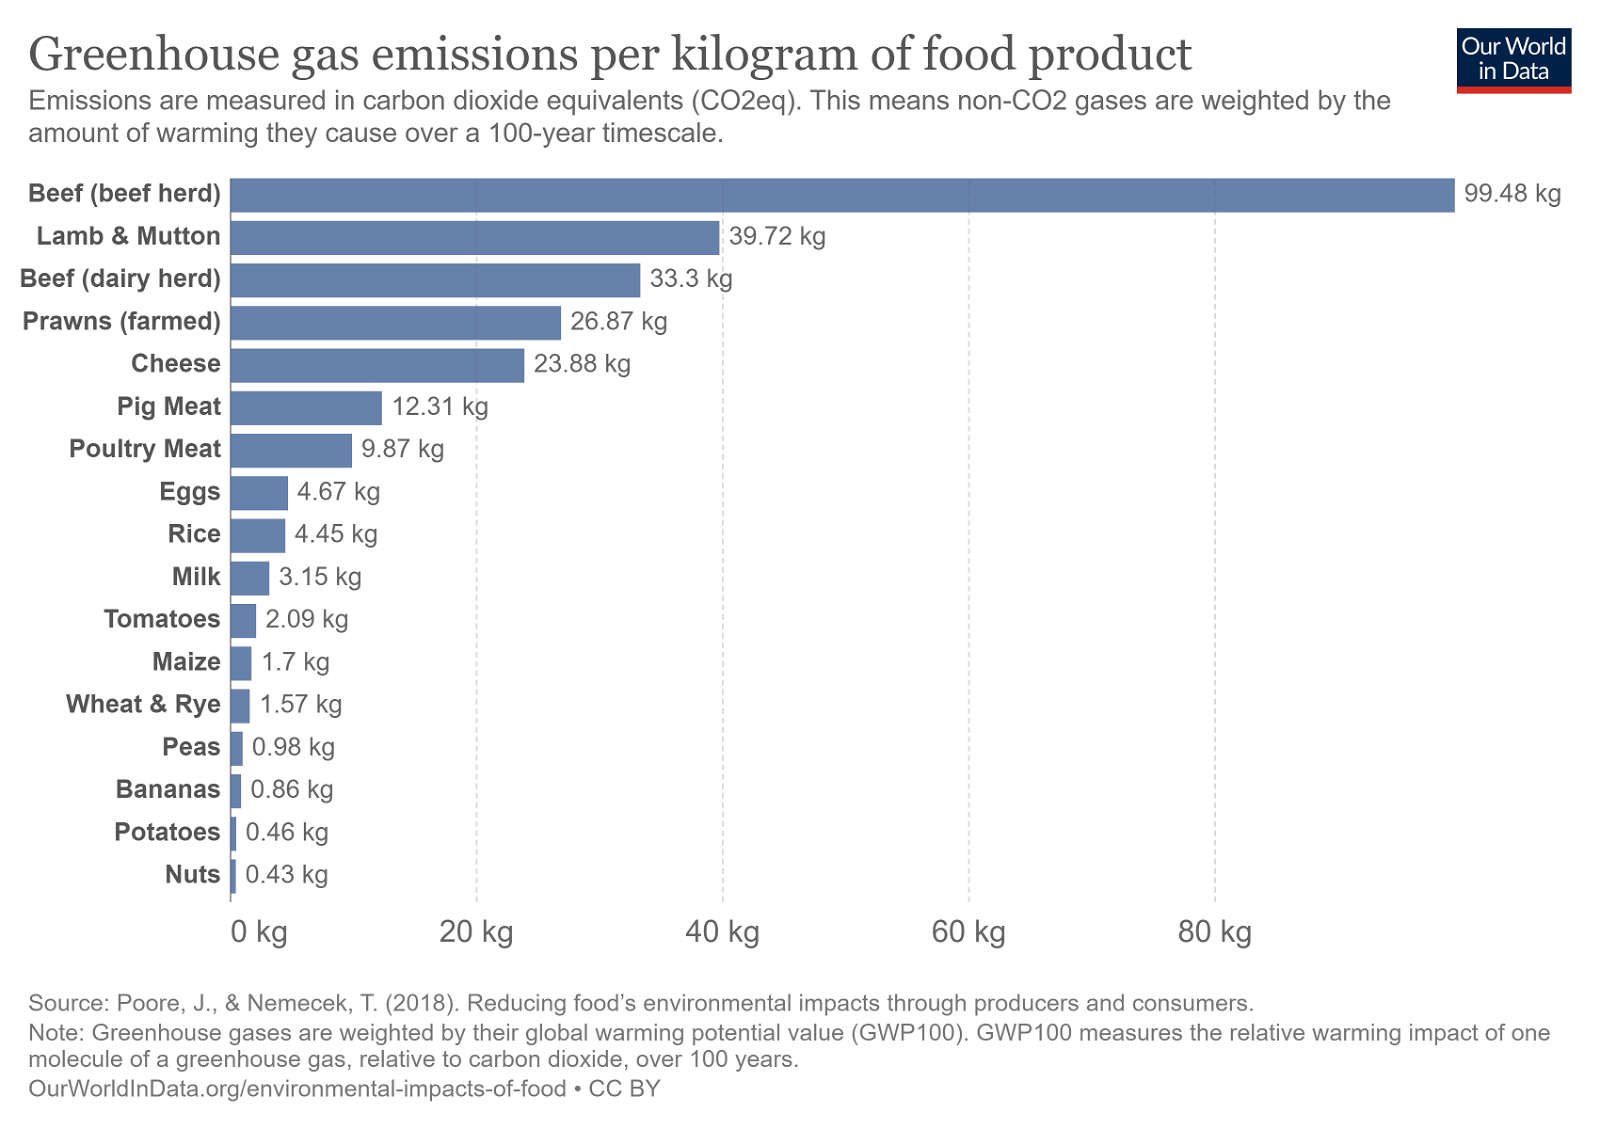 Figure 2: Chart showing greenhouse gas emissions per kilogram of food product (source Our World in Data).